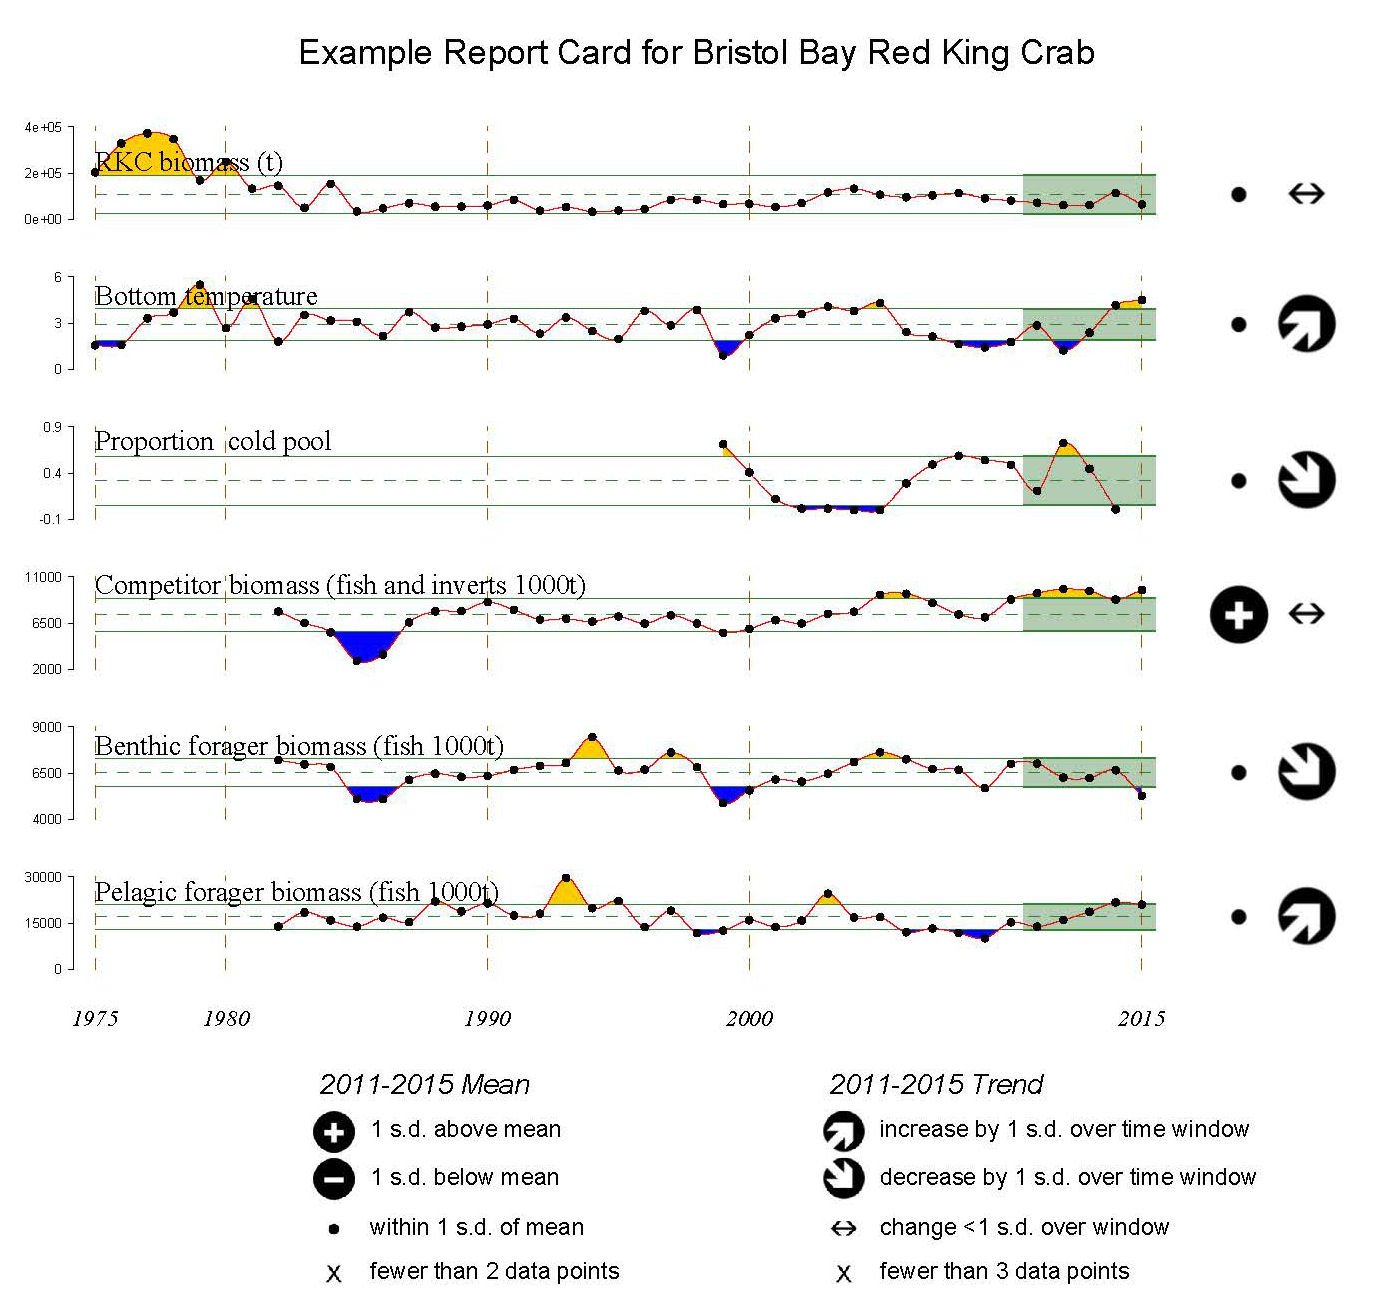 Example report card for Bristol Bay red
				king crab. Arrows to the left of each indicator indicates how the mean of the previous five years
				compares to the long-term average and how the previous five years are trending. Click image to 
				enlarge.